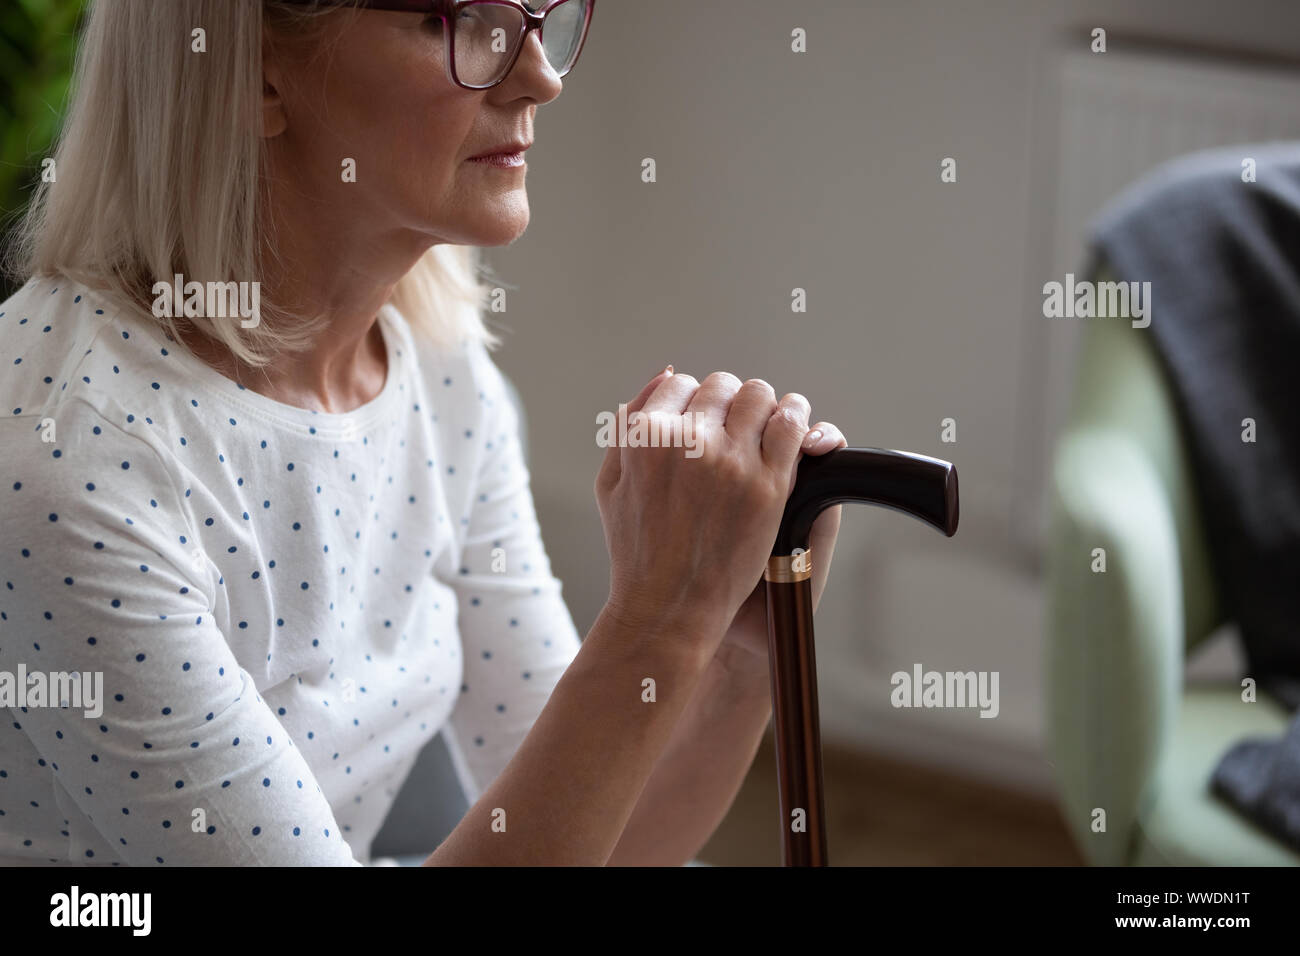 Cropped upset mature woman in glasses holding cane, sitting alone Stock Photo